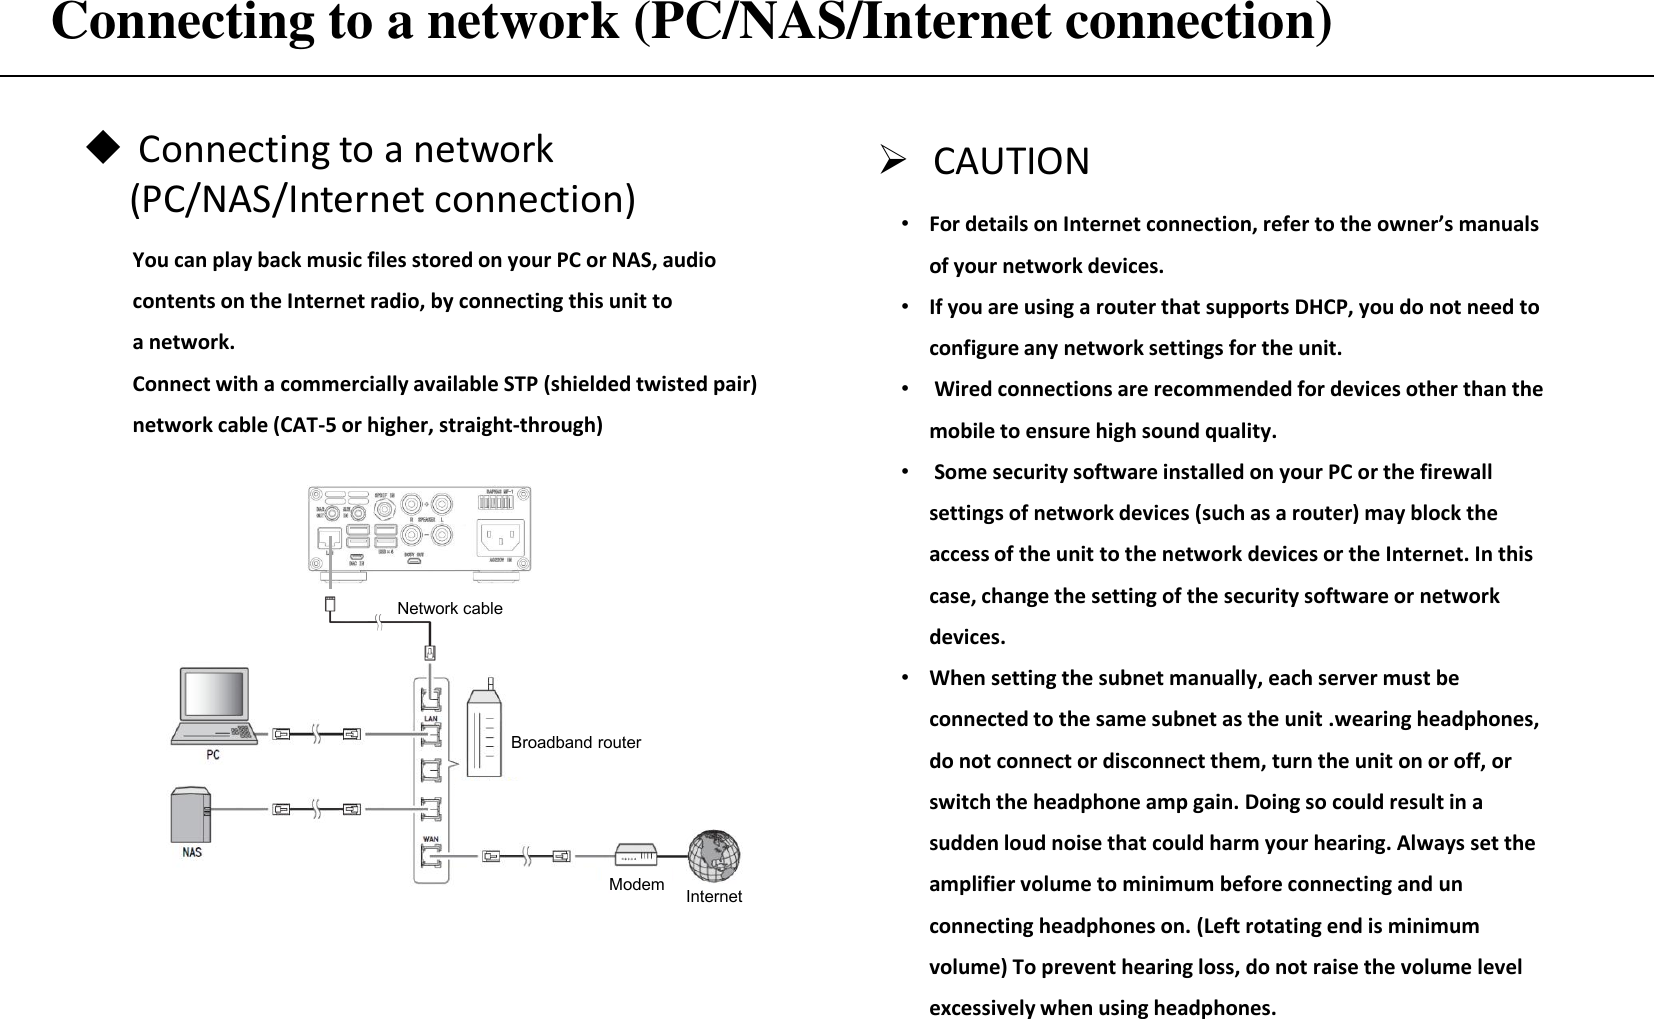 Connecting to a network (PC/NAS/Internet connection) CAUTION •For details on Internet connection, refer to the owner’s manuals of your network devices. •If you are using a router that supports DHCP, you do not need to configure any network settings for the unit.  • Wired connections are recommended for devices other than the mobile to ensure high sound quality. • Some security software installed on your PC or the firewall settings of network devices (such as a router) may block the access of the unit to the network devices or the Internet. In this case, change the setting of the security software or network devices. •When setting the subnet manually, each server must be connected to the same subnet as the unit .wearing headphones, do not connect or disconnect them, turn the unit on or off, or switch the headphone amp gain. Doing so could result in a sudden loud noise that could harm your hearing. Always set the  amplifier volume to minimum before connecting and un connecting headphones on. (Left rotating end is minimum volume) To prevent hearing loss, do not raise the volume level excessively when using headphones. Connecting to a network      (PC/NAS/Internet connection) You can play back music files stored on your PC or NAS, audio contents on the Internet radio, by connecting this unit to a network. Connect with a commercially available STP (shielded twisted pair) network cable (CAT-5 or higher, straight-through) Network cable Broadband router Modem  Internet 